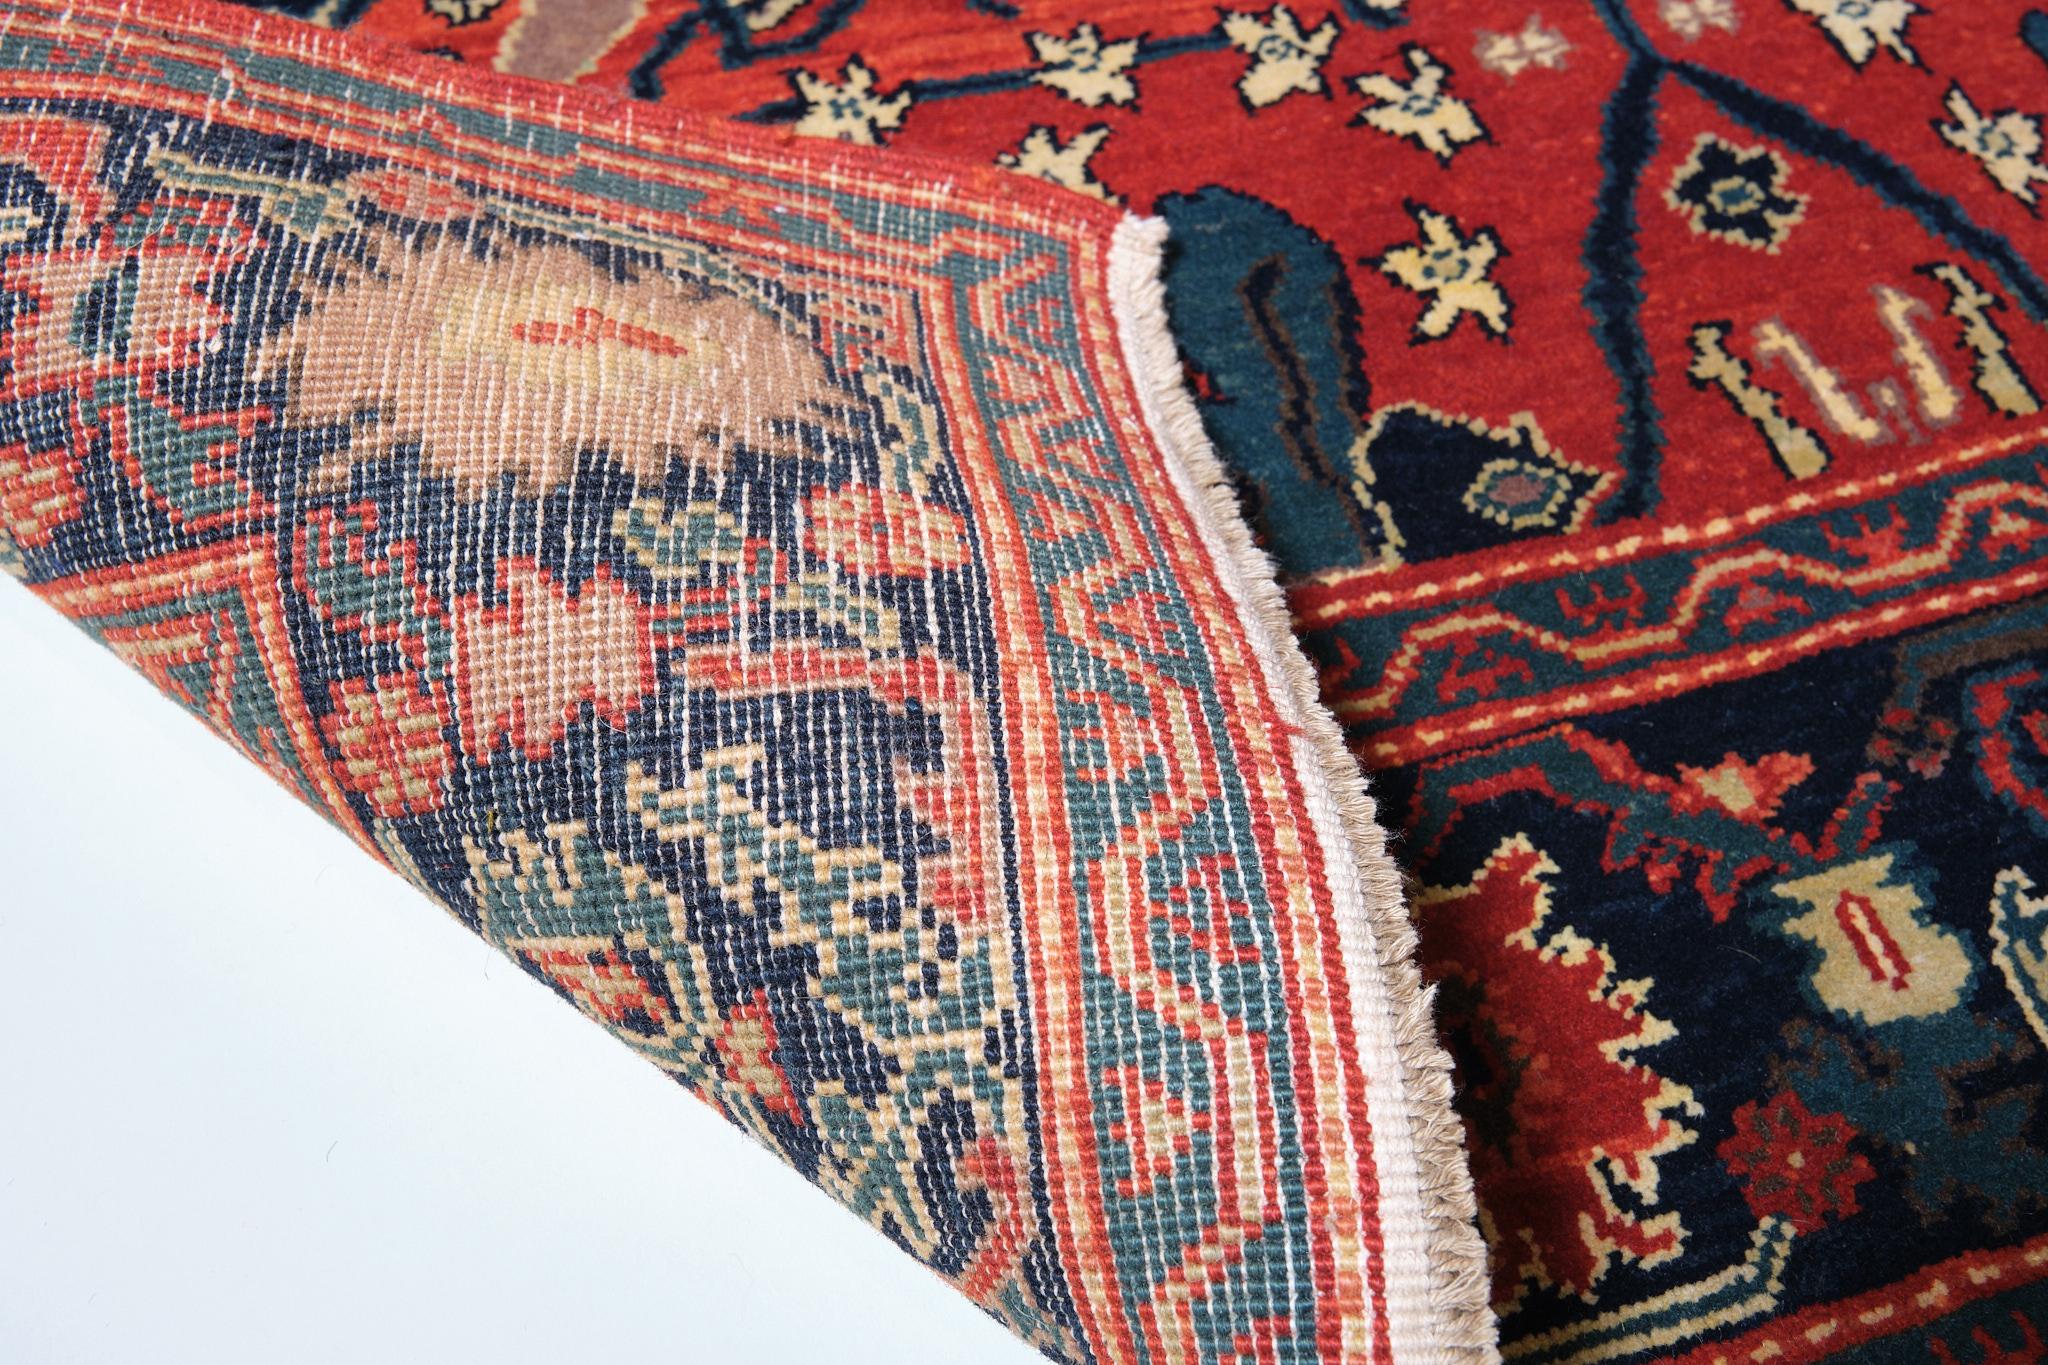 Turkish Ararat Rugs Gerous Arabesque Rug, 19th C. Persian Revival Carpet Natural Dyed For Sale